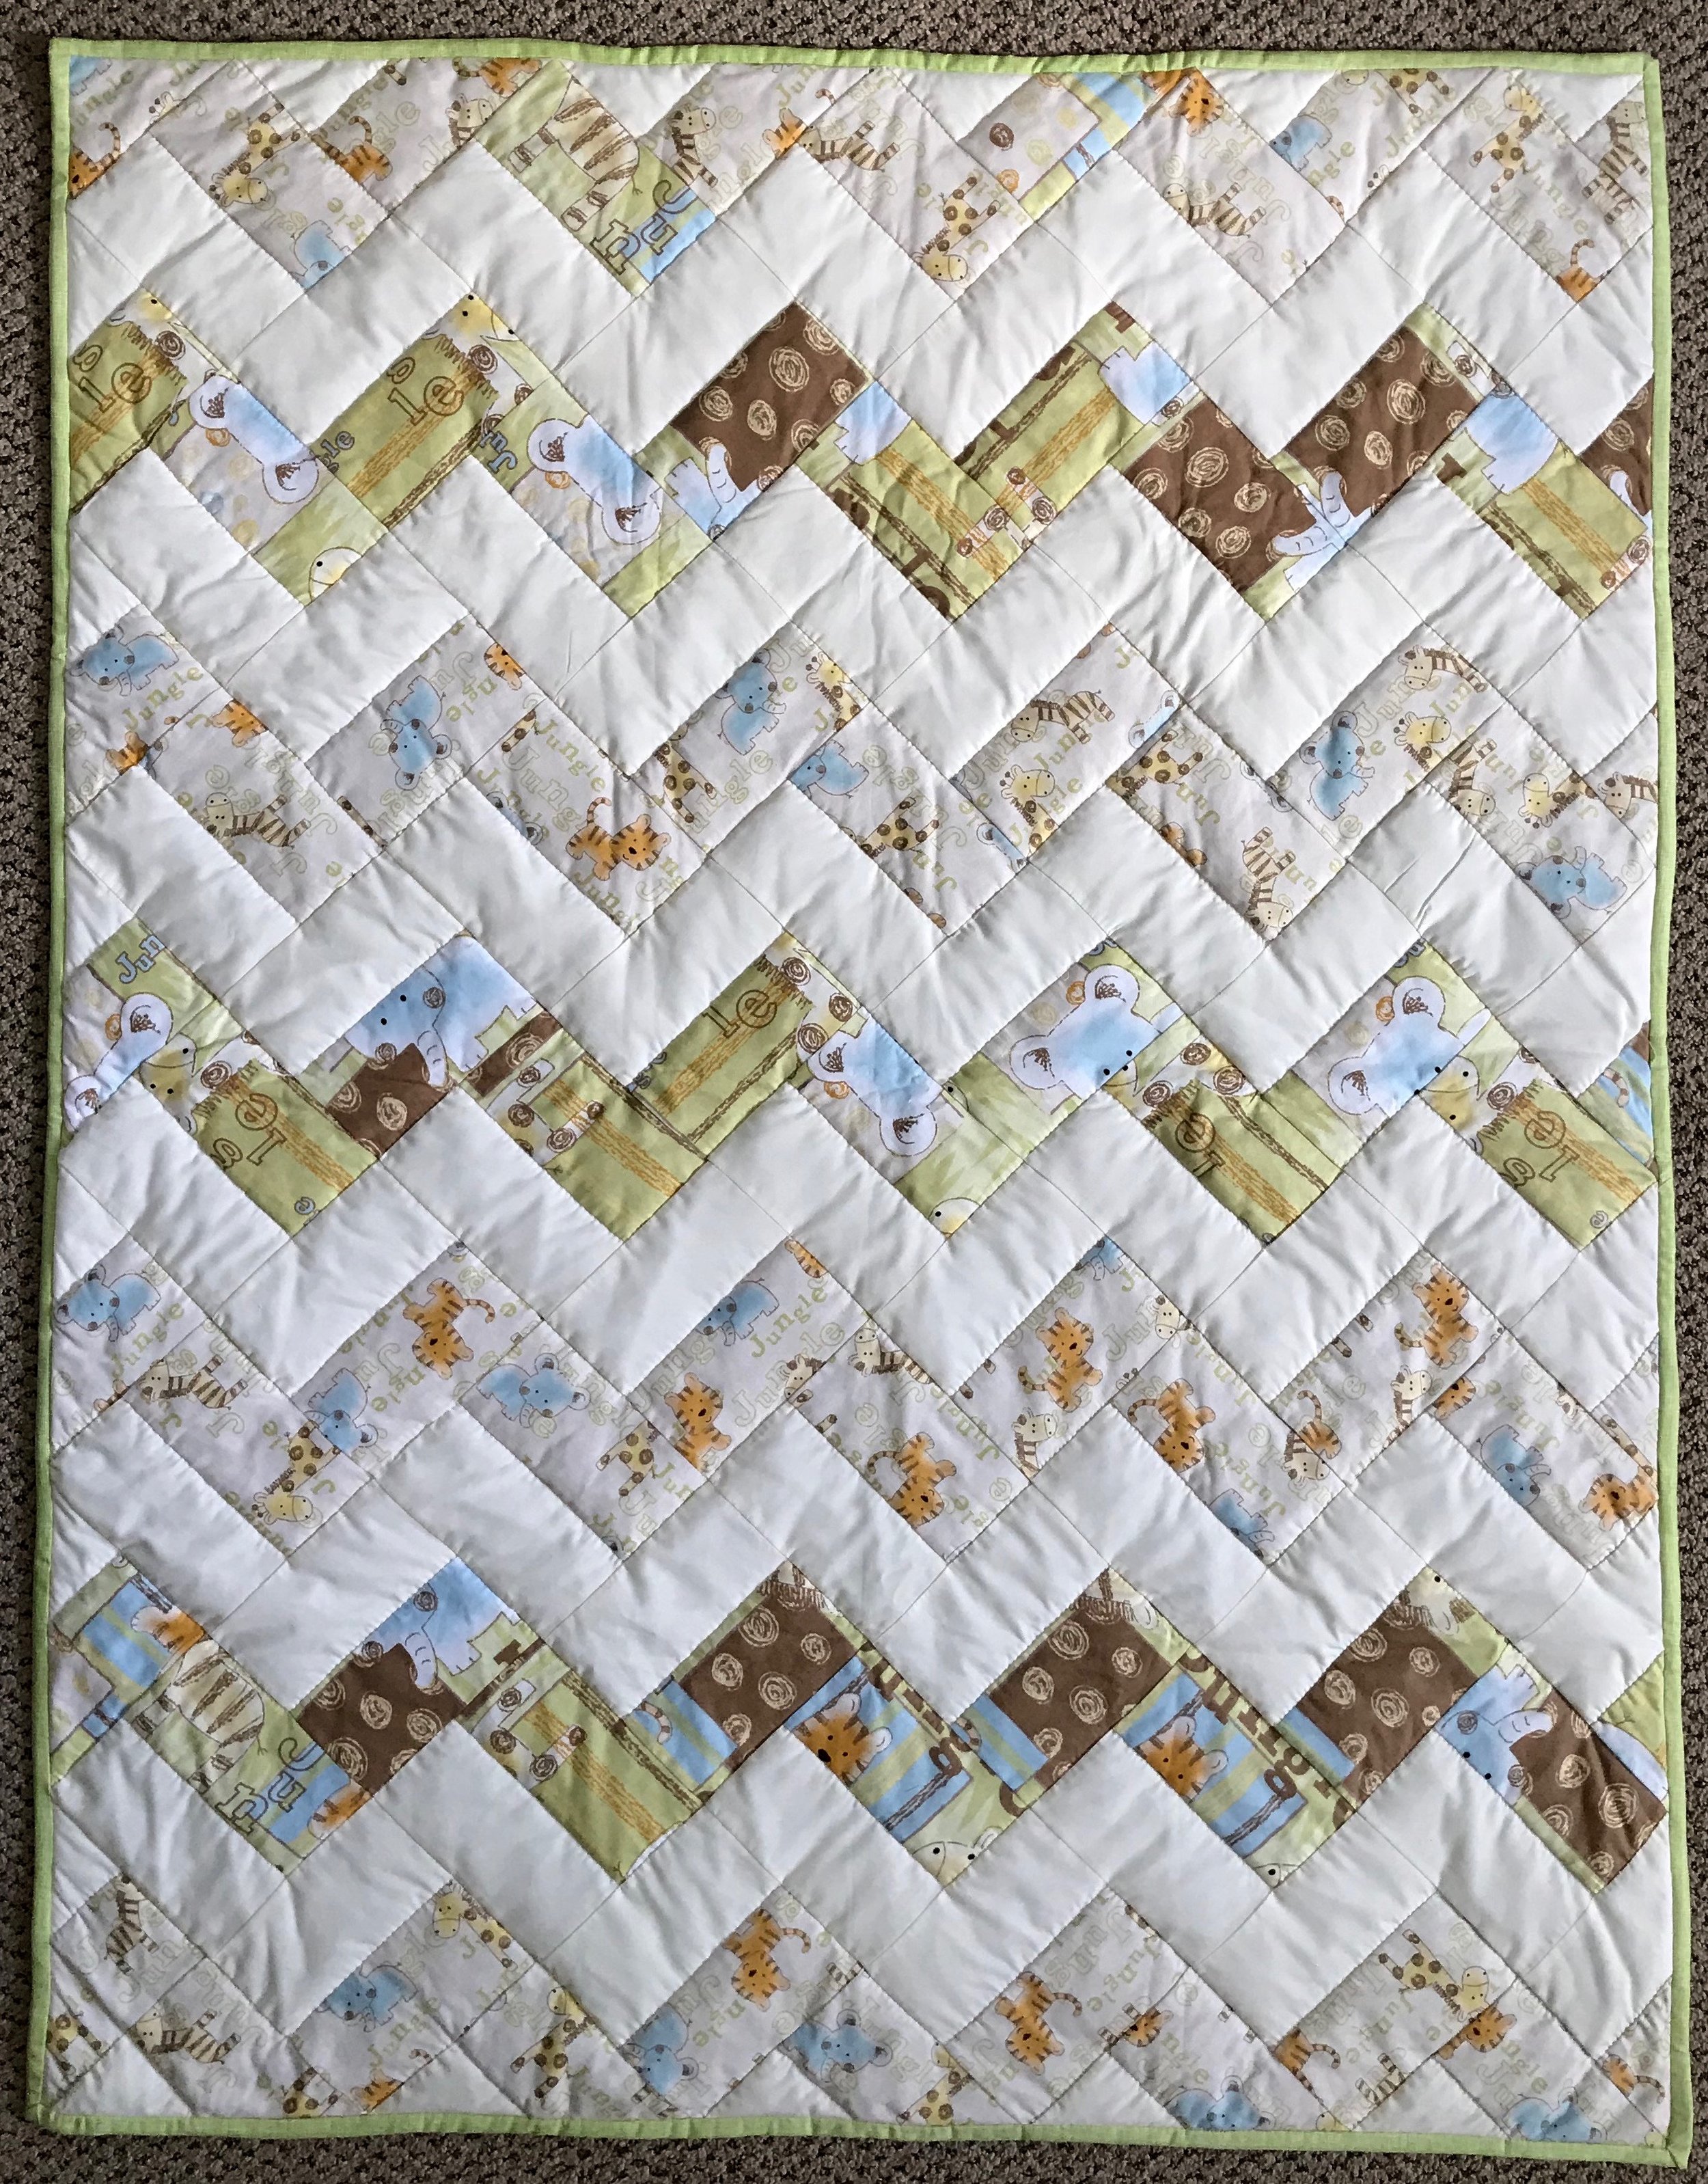 Jungle Paths, Pieced, Hand Quilted, donated by Holdeman Mennonite Church, 36 x 46”